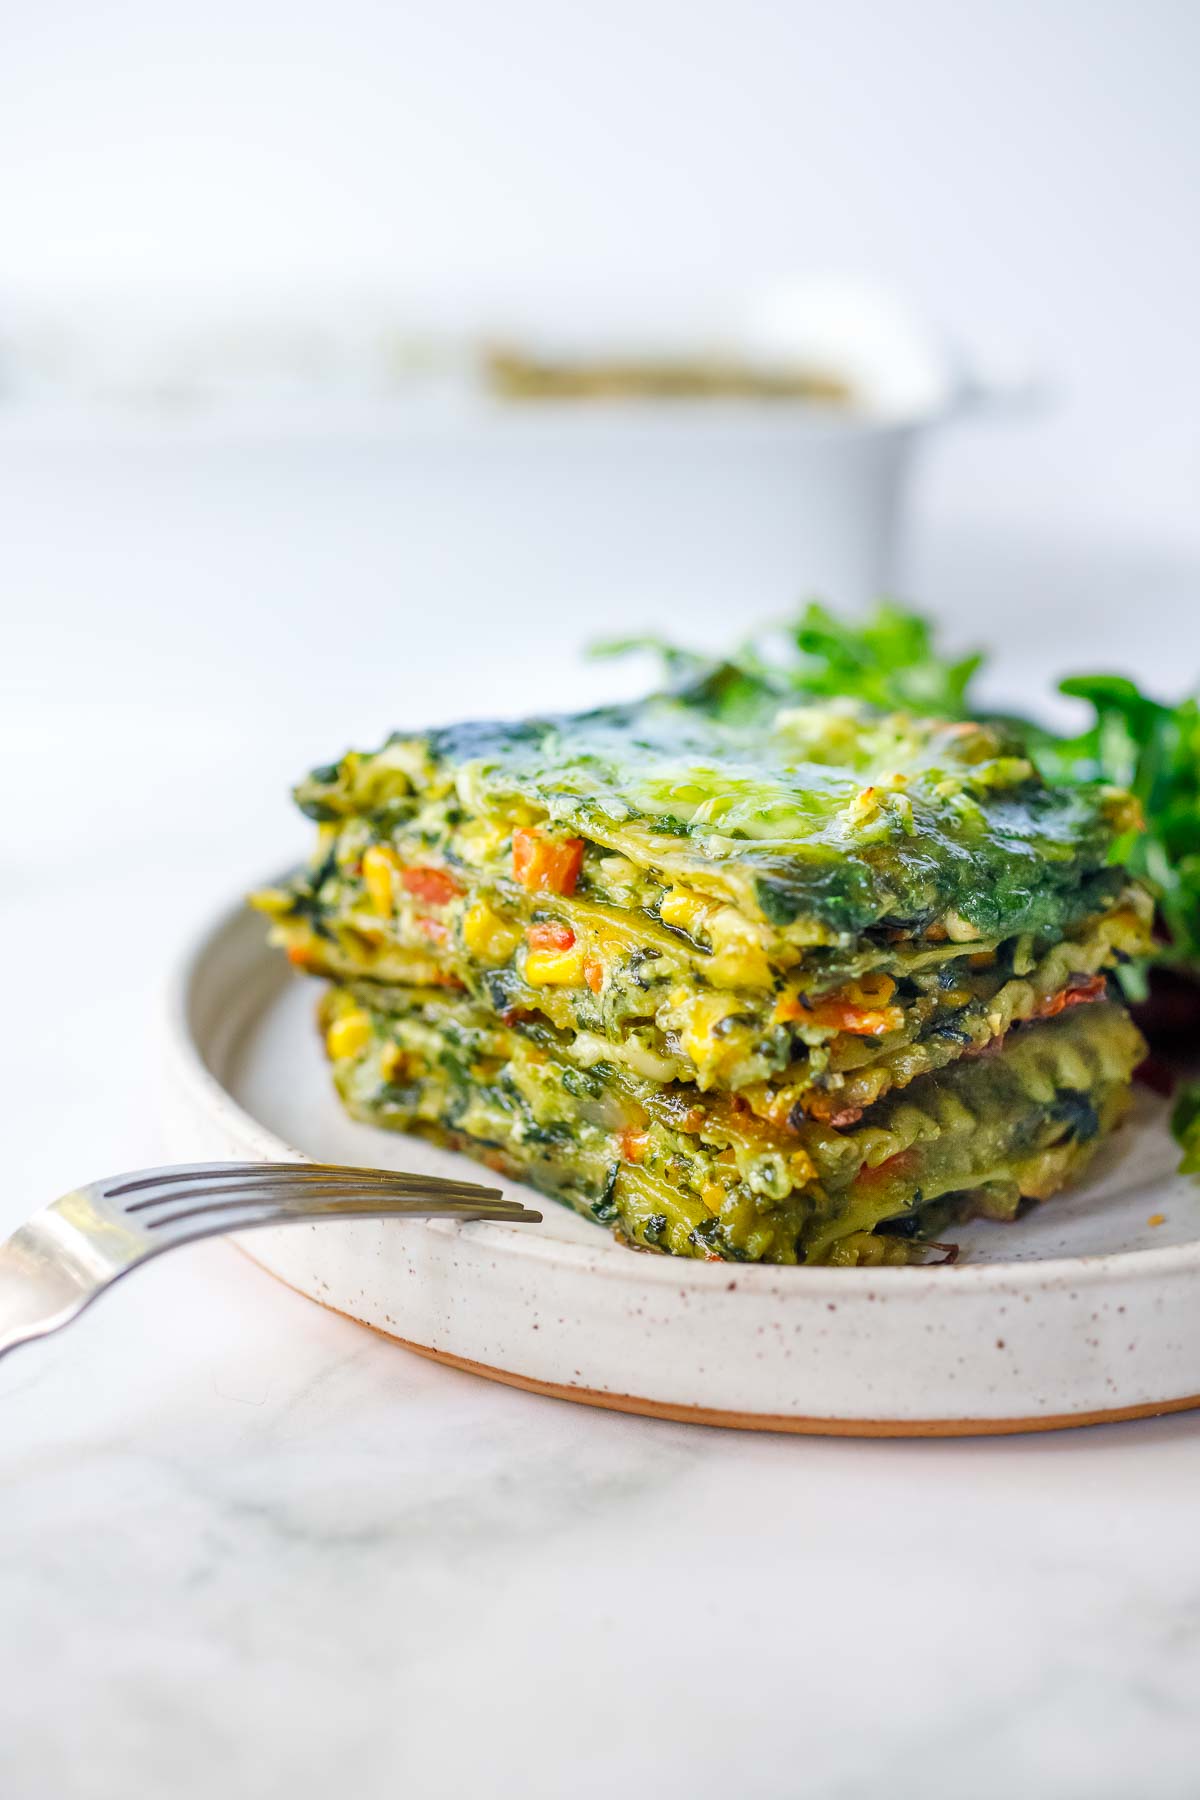 A delicious recipe for Spinach Lasagna filled with savory spinach and your choice of veggies and layered with a luscious Basil Spinach Sauce. Keep it vegetarian, or add chicken. 